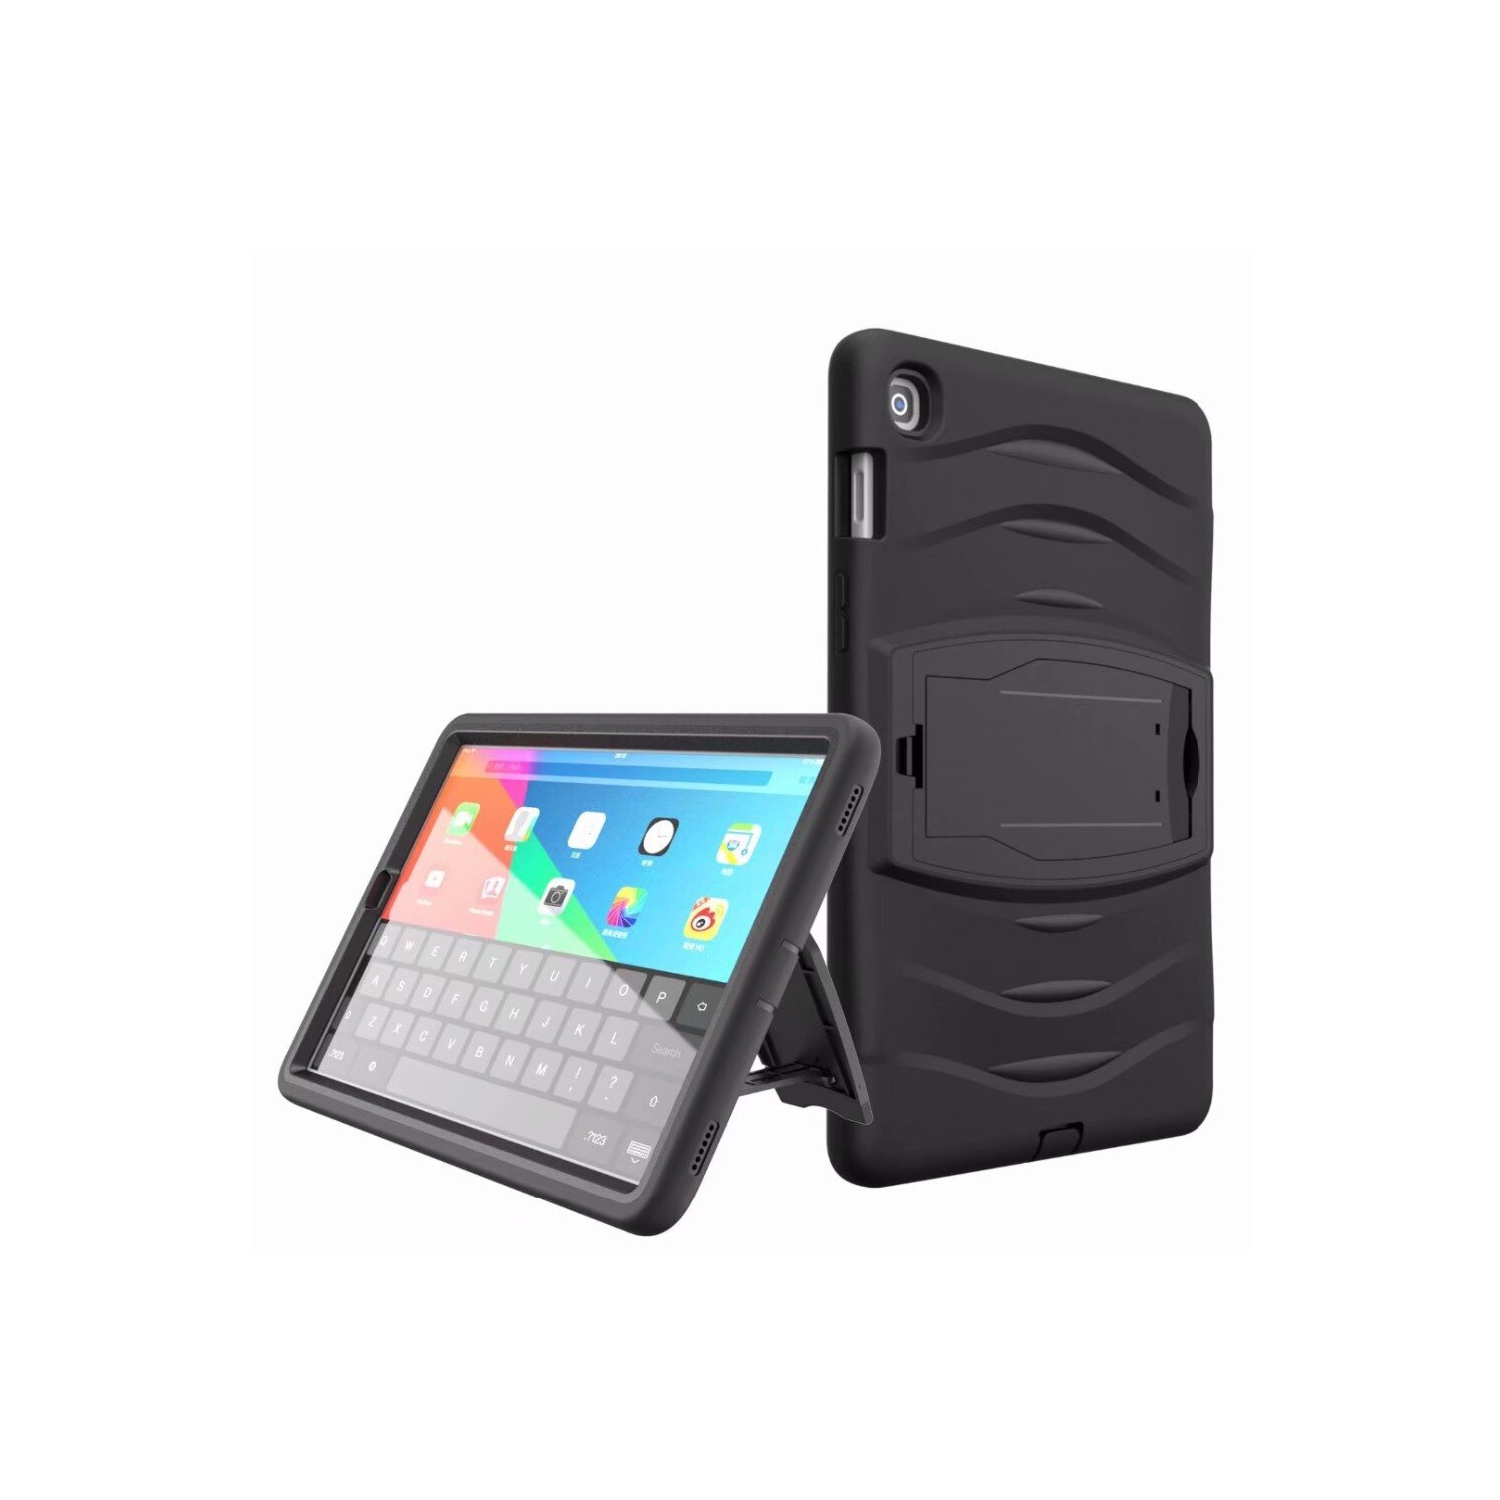 【CSmart】 Shockproof Heavy Duty Rugged Defender Case Kickstand Cover for Samsung Galaxy Tab S5e 10.5" 2019, T720 T725, Black